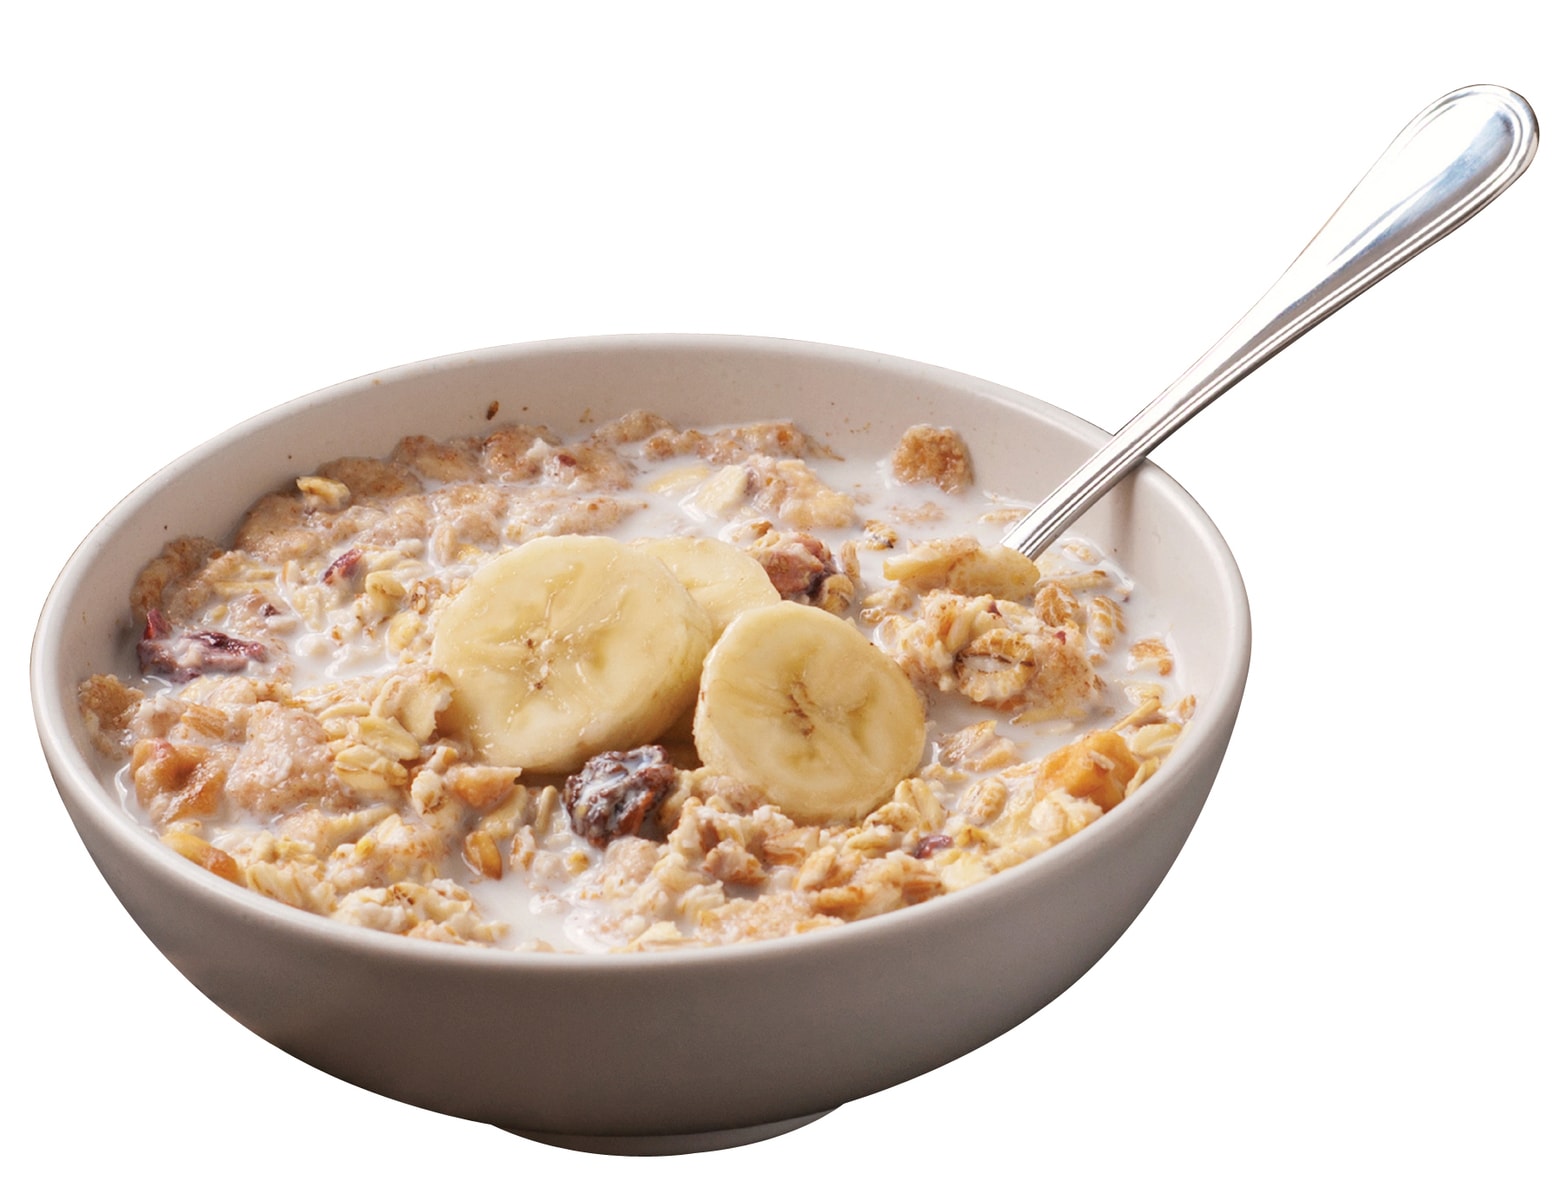 How to choose hot cereals - Healthy Food Guide